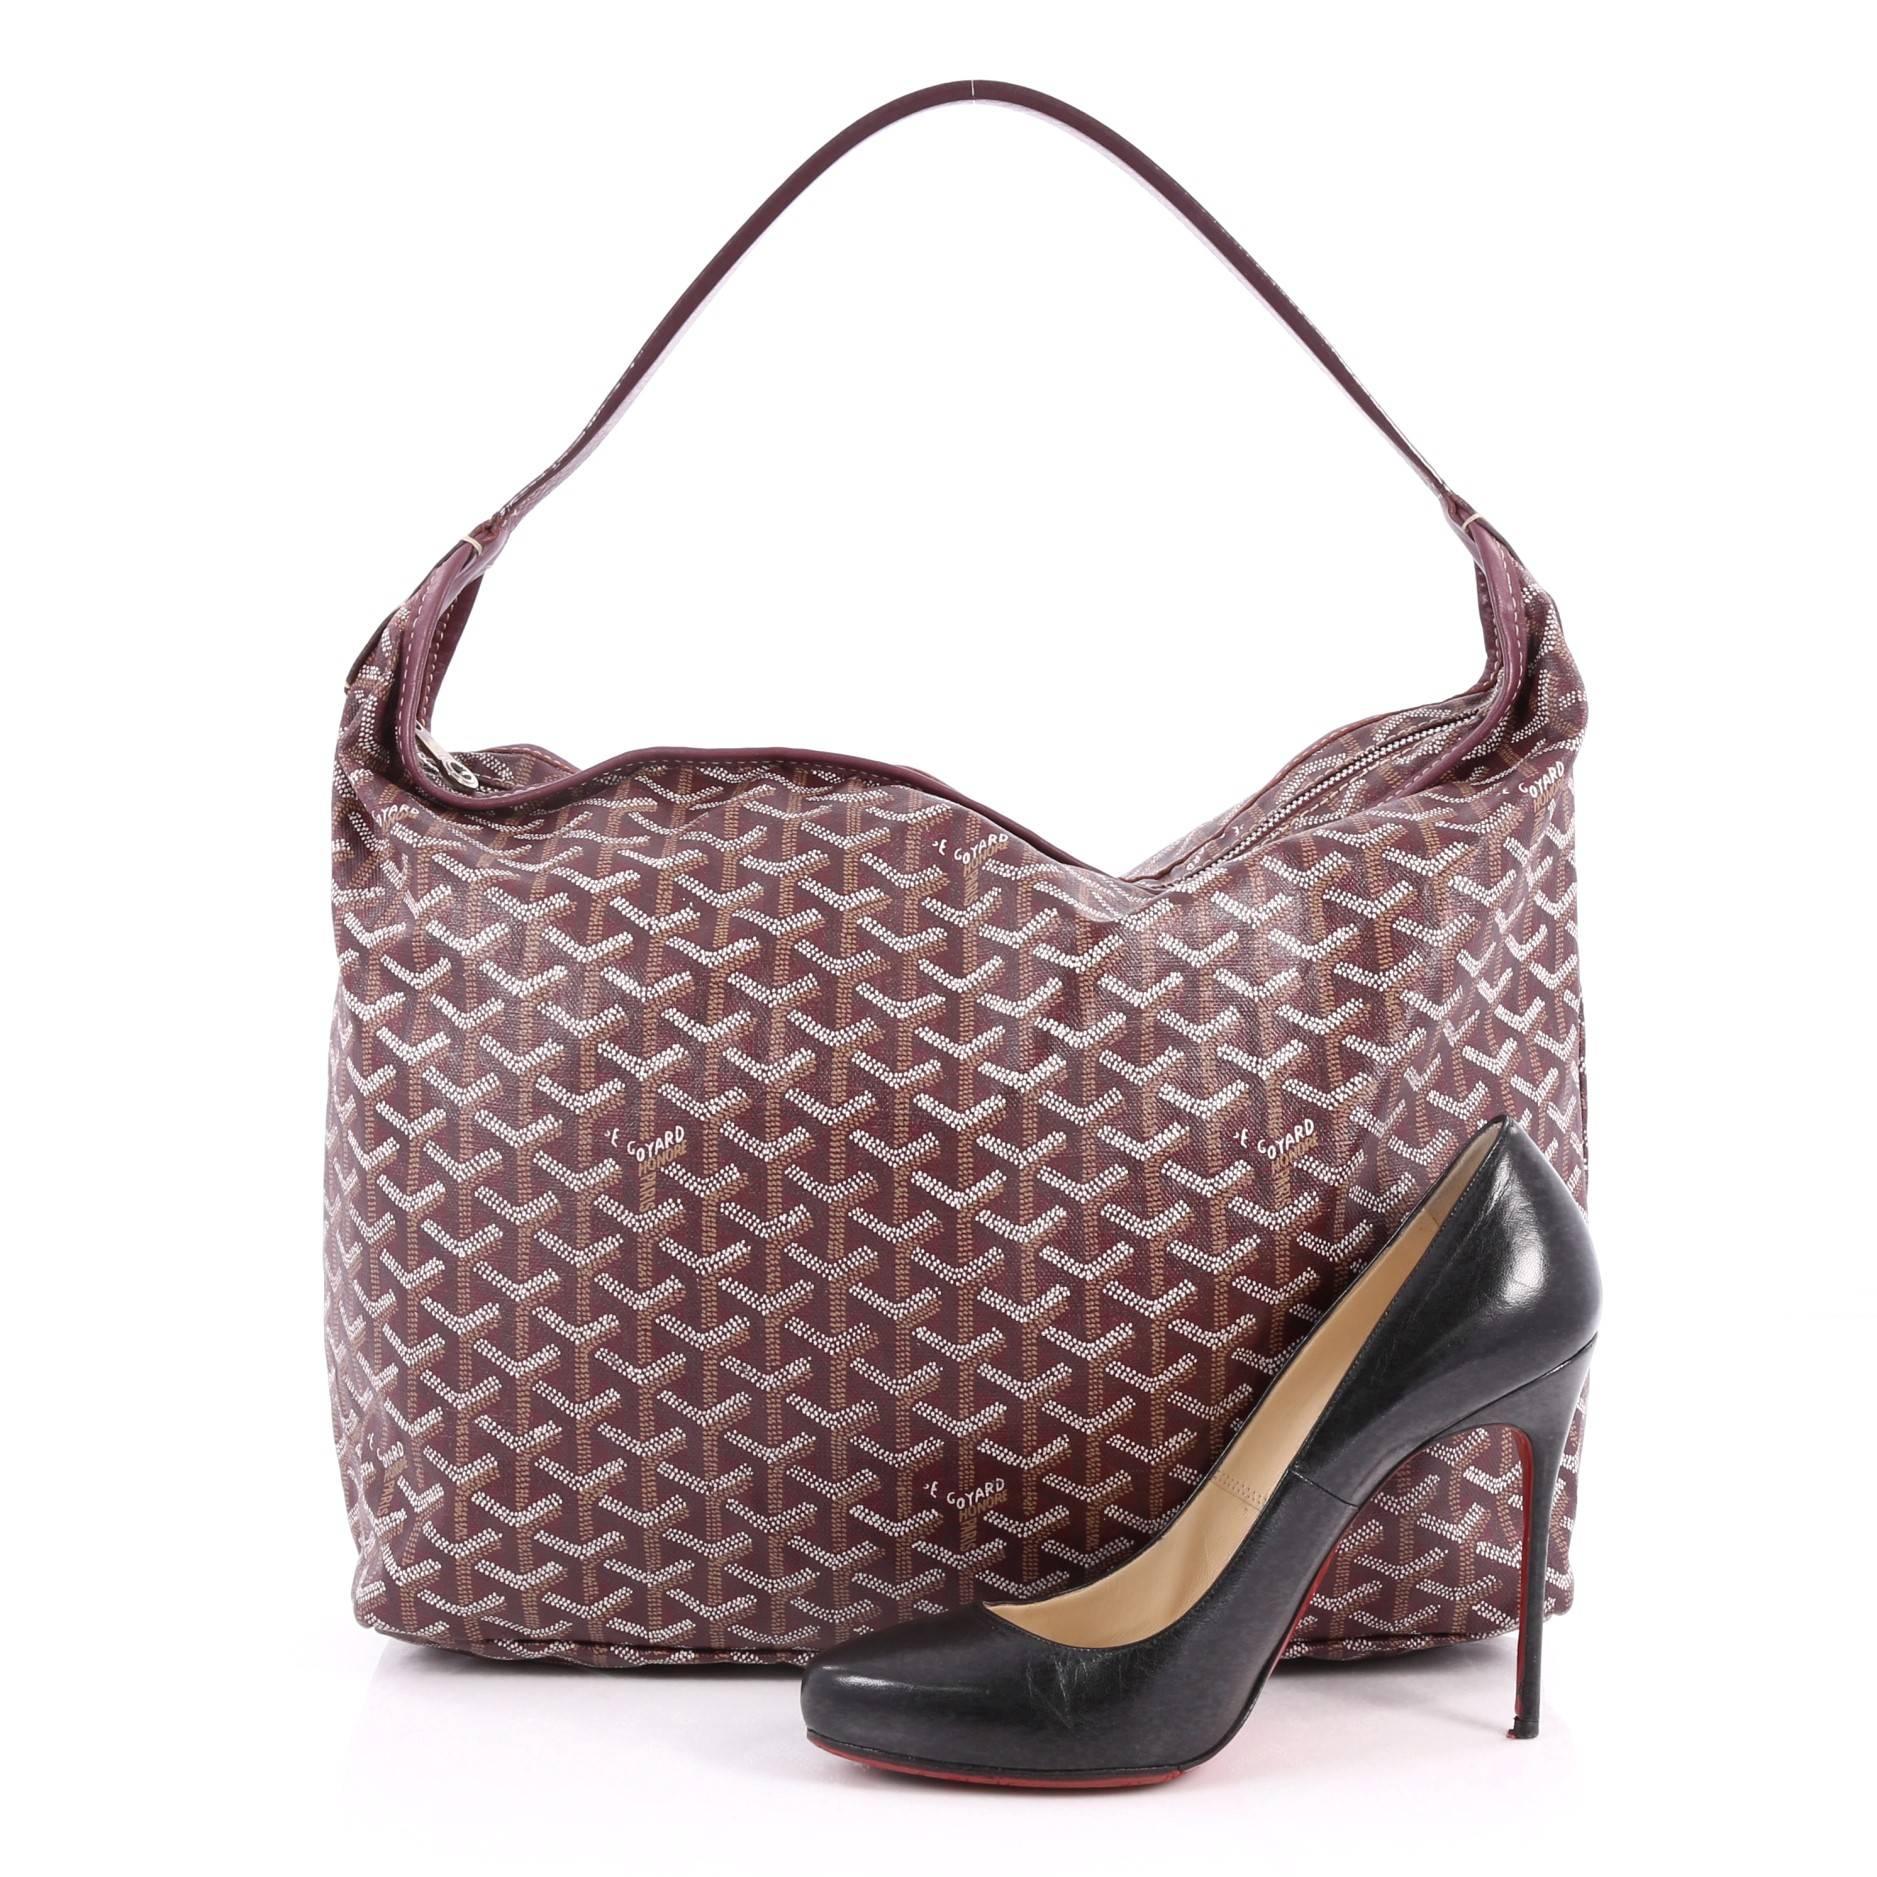 This authentic Goyard Fidji Hobo Coated Canvas is a blend of luxury and casual sophistication. Crafted from purple Goyardine chevron coated canvas, this bag features a flat leather handle, purple leather trims, and silver-tone hardware accents. Its